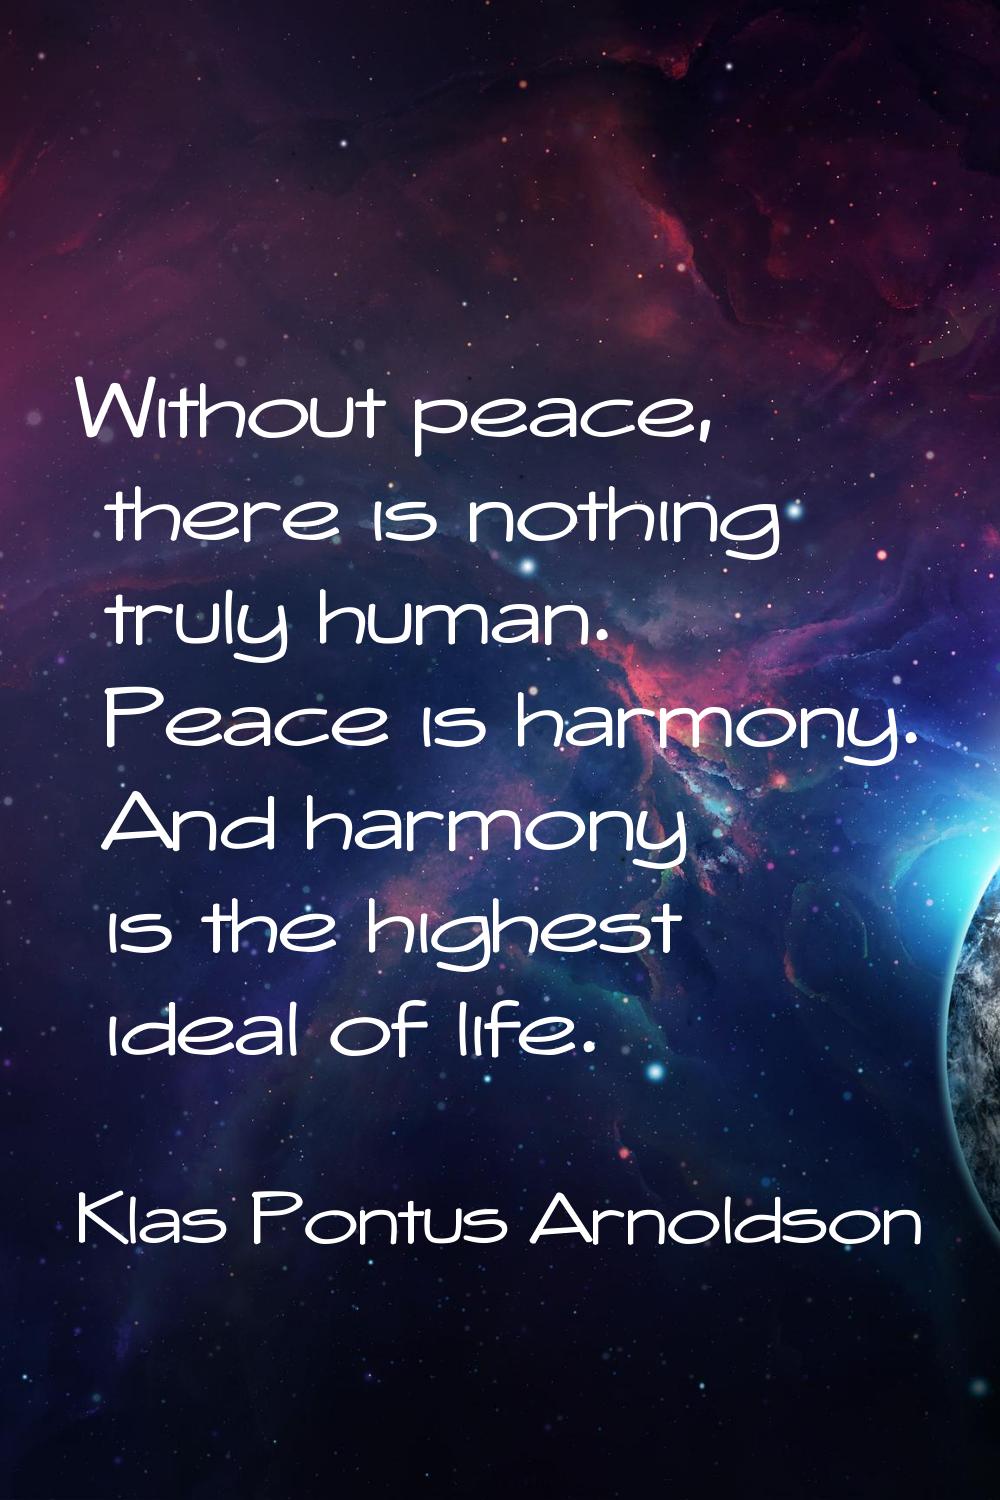 Without peace, there is nothing truly human. Peace is harmony. And harmony is the highest ideal of 